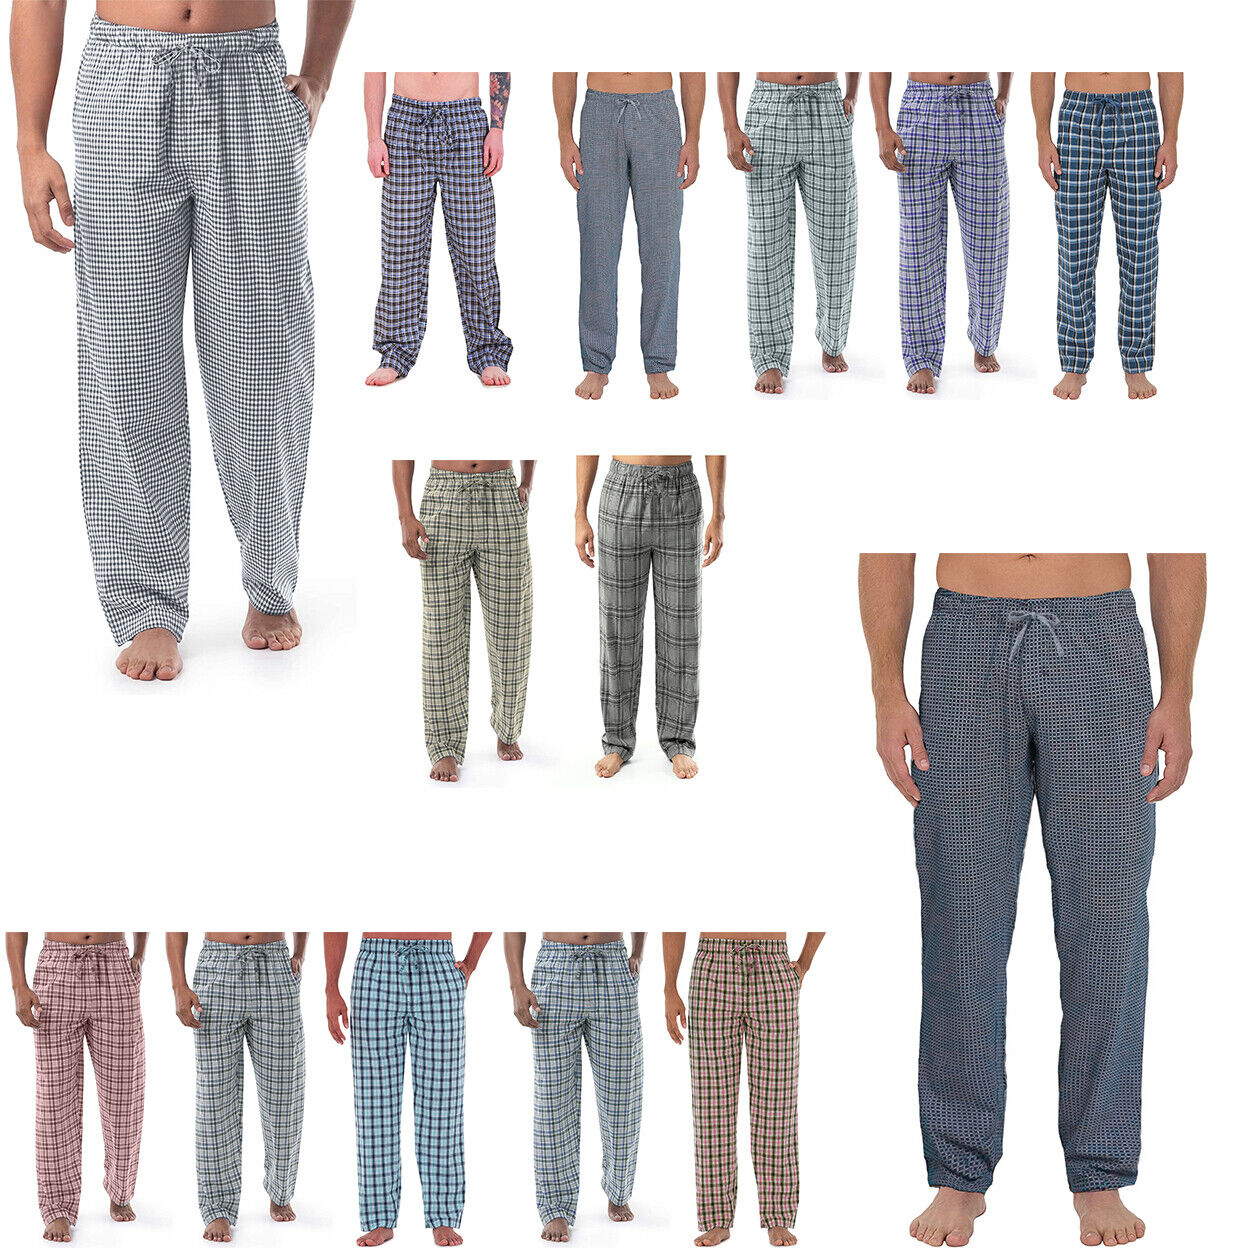 Multi-Pack: Men's Ultra-Soft Solid & Plaid Cotton Jersey Knit Comfy Sleep Lounge Pajama Pants - 1-pack Plaid, Large